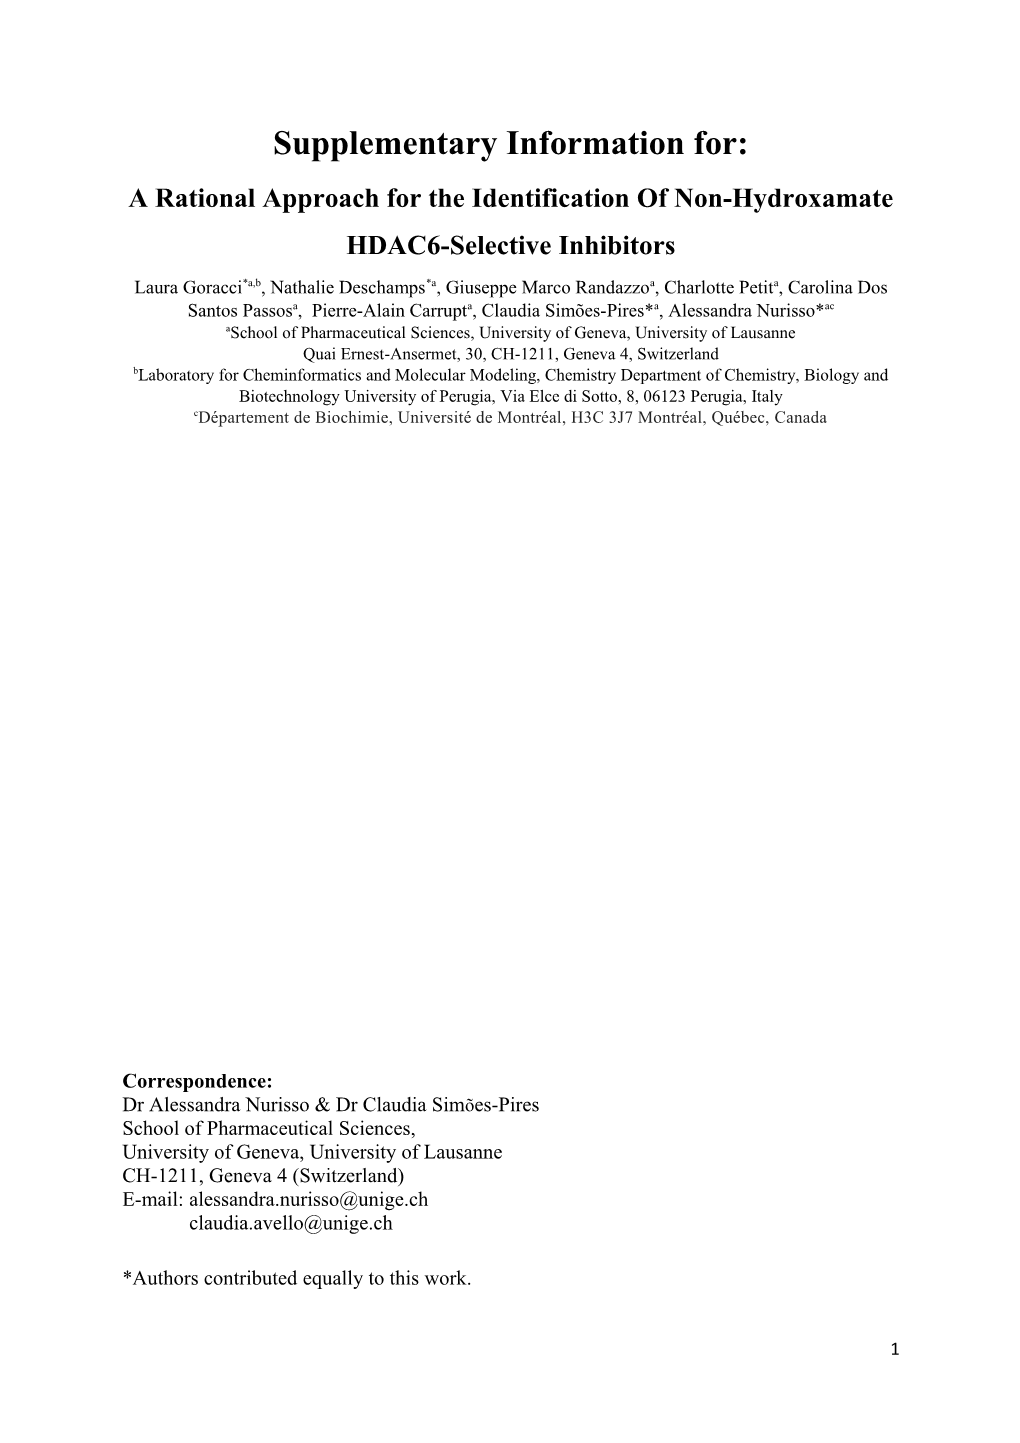 A Rational Approach for the Identification of Non-Hydroxamate HDAC6-Selective Inhibitors